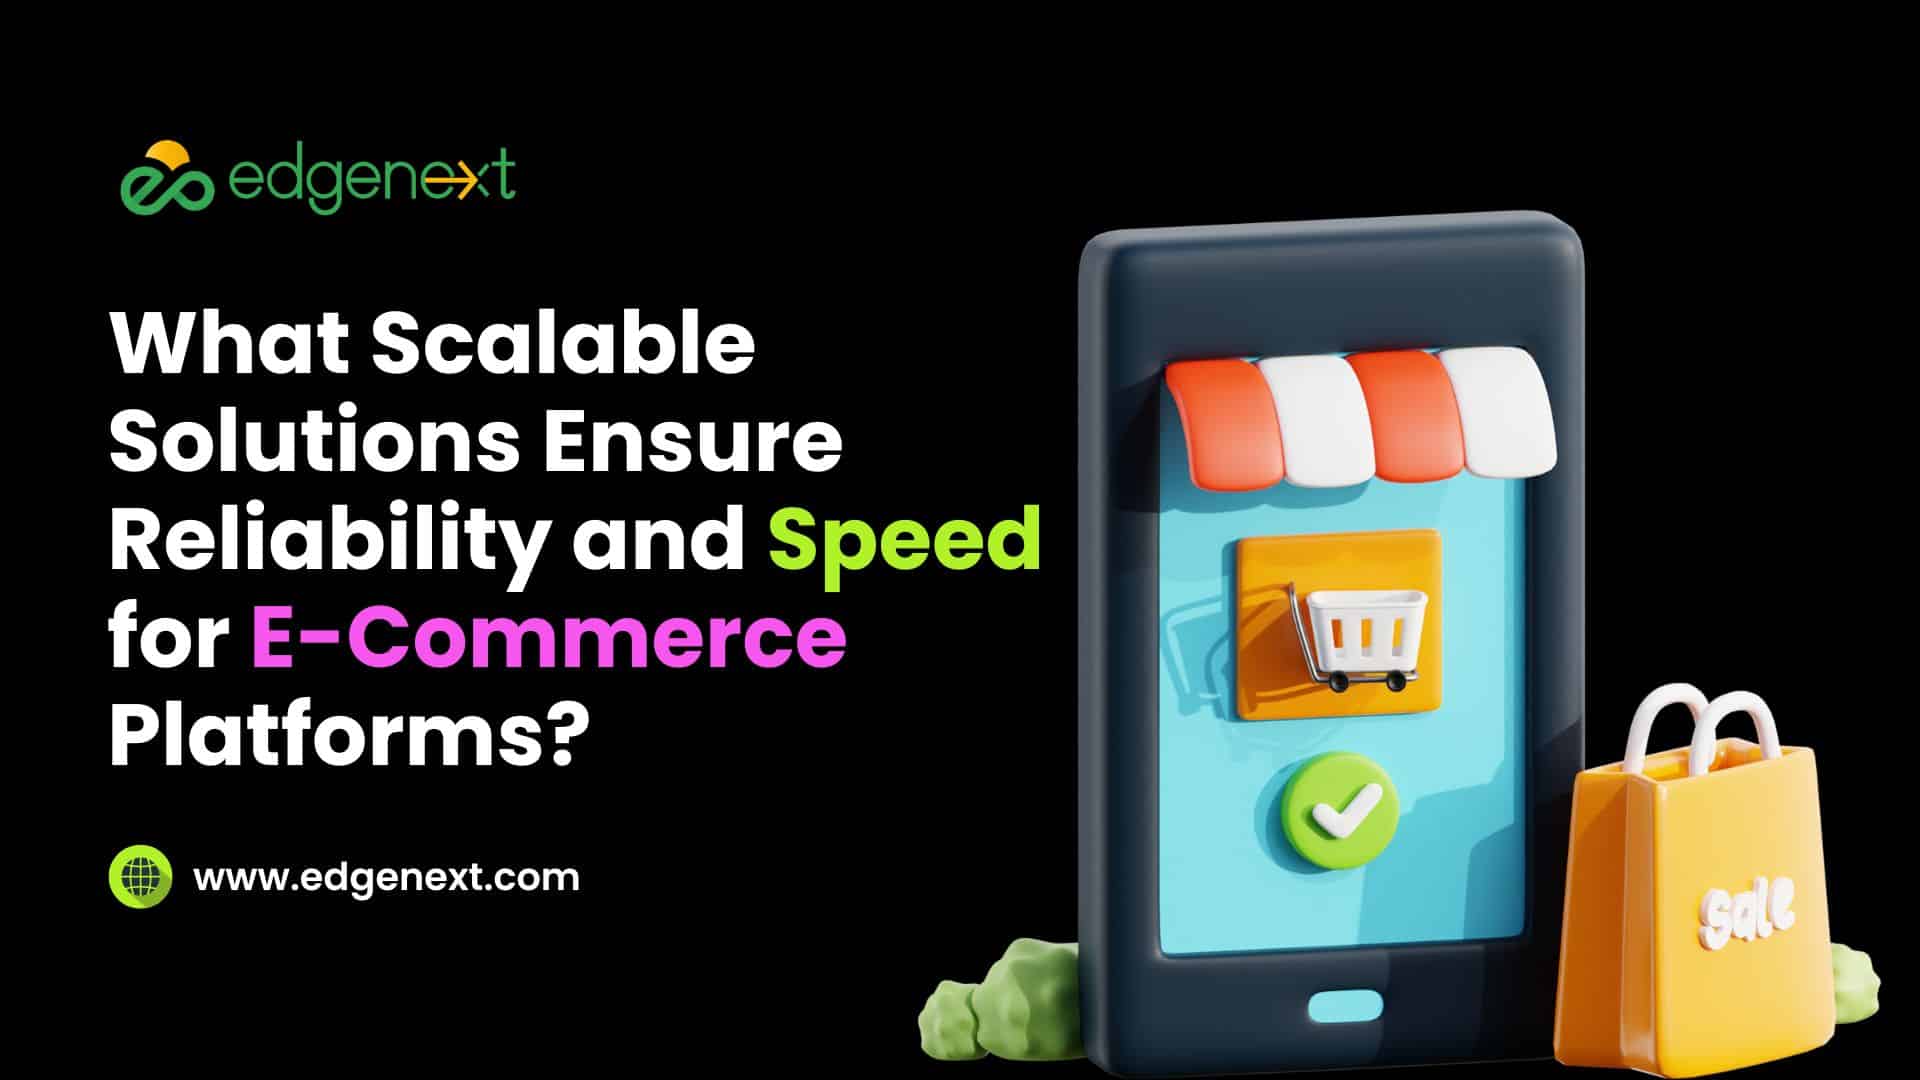 What Scalable Solutions Ensure Reliability and Speed for E-Commerce Platforms?